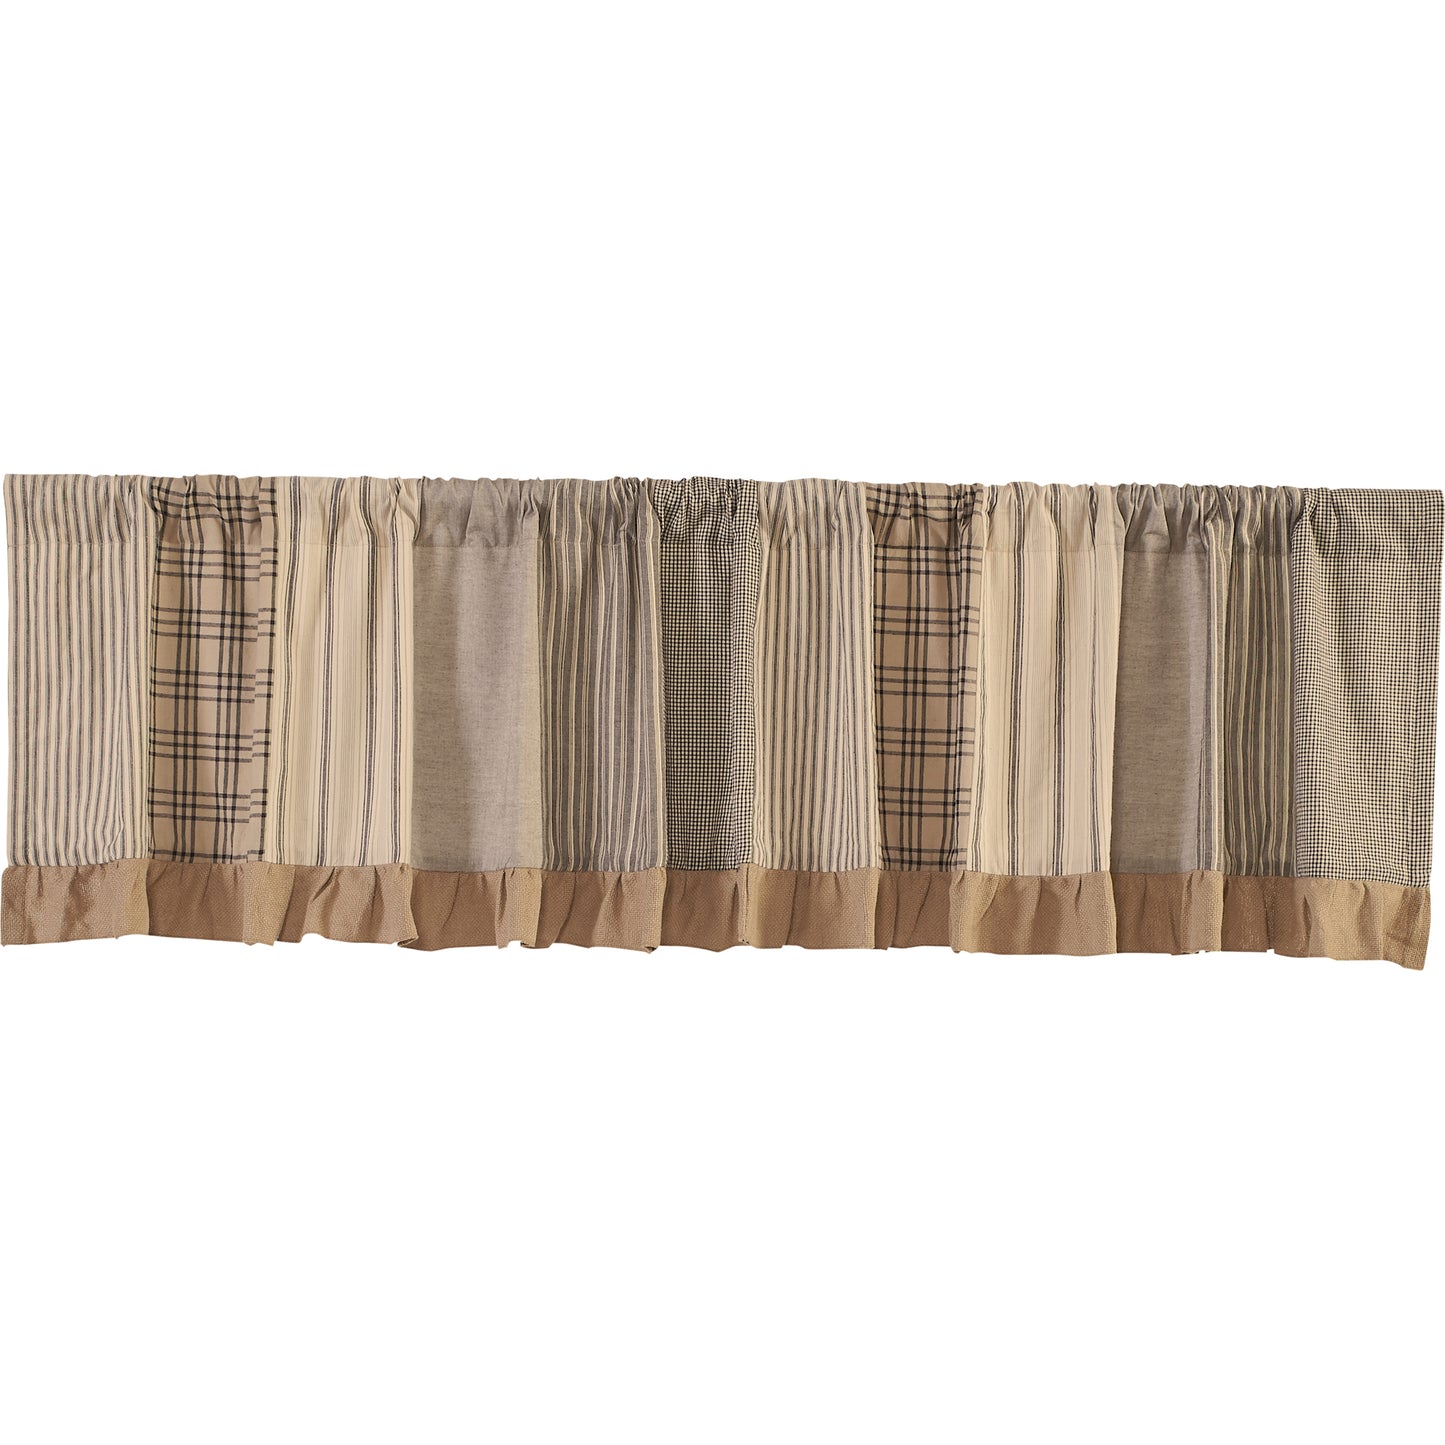 38041-Sawyer-Mill-Charcoal-Patchwork-Valance-19x90-image-3